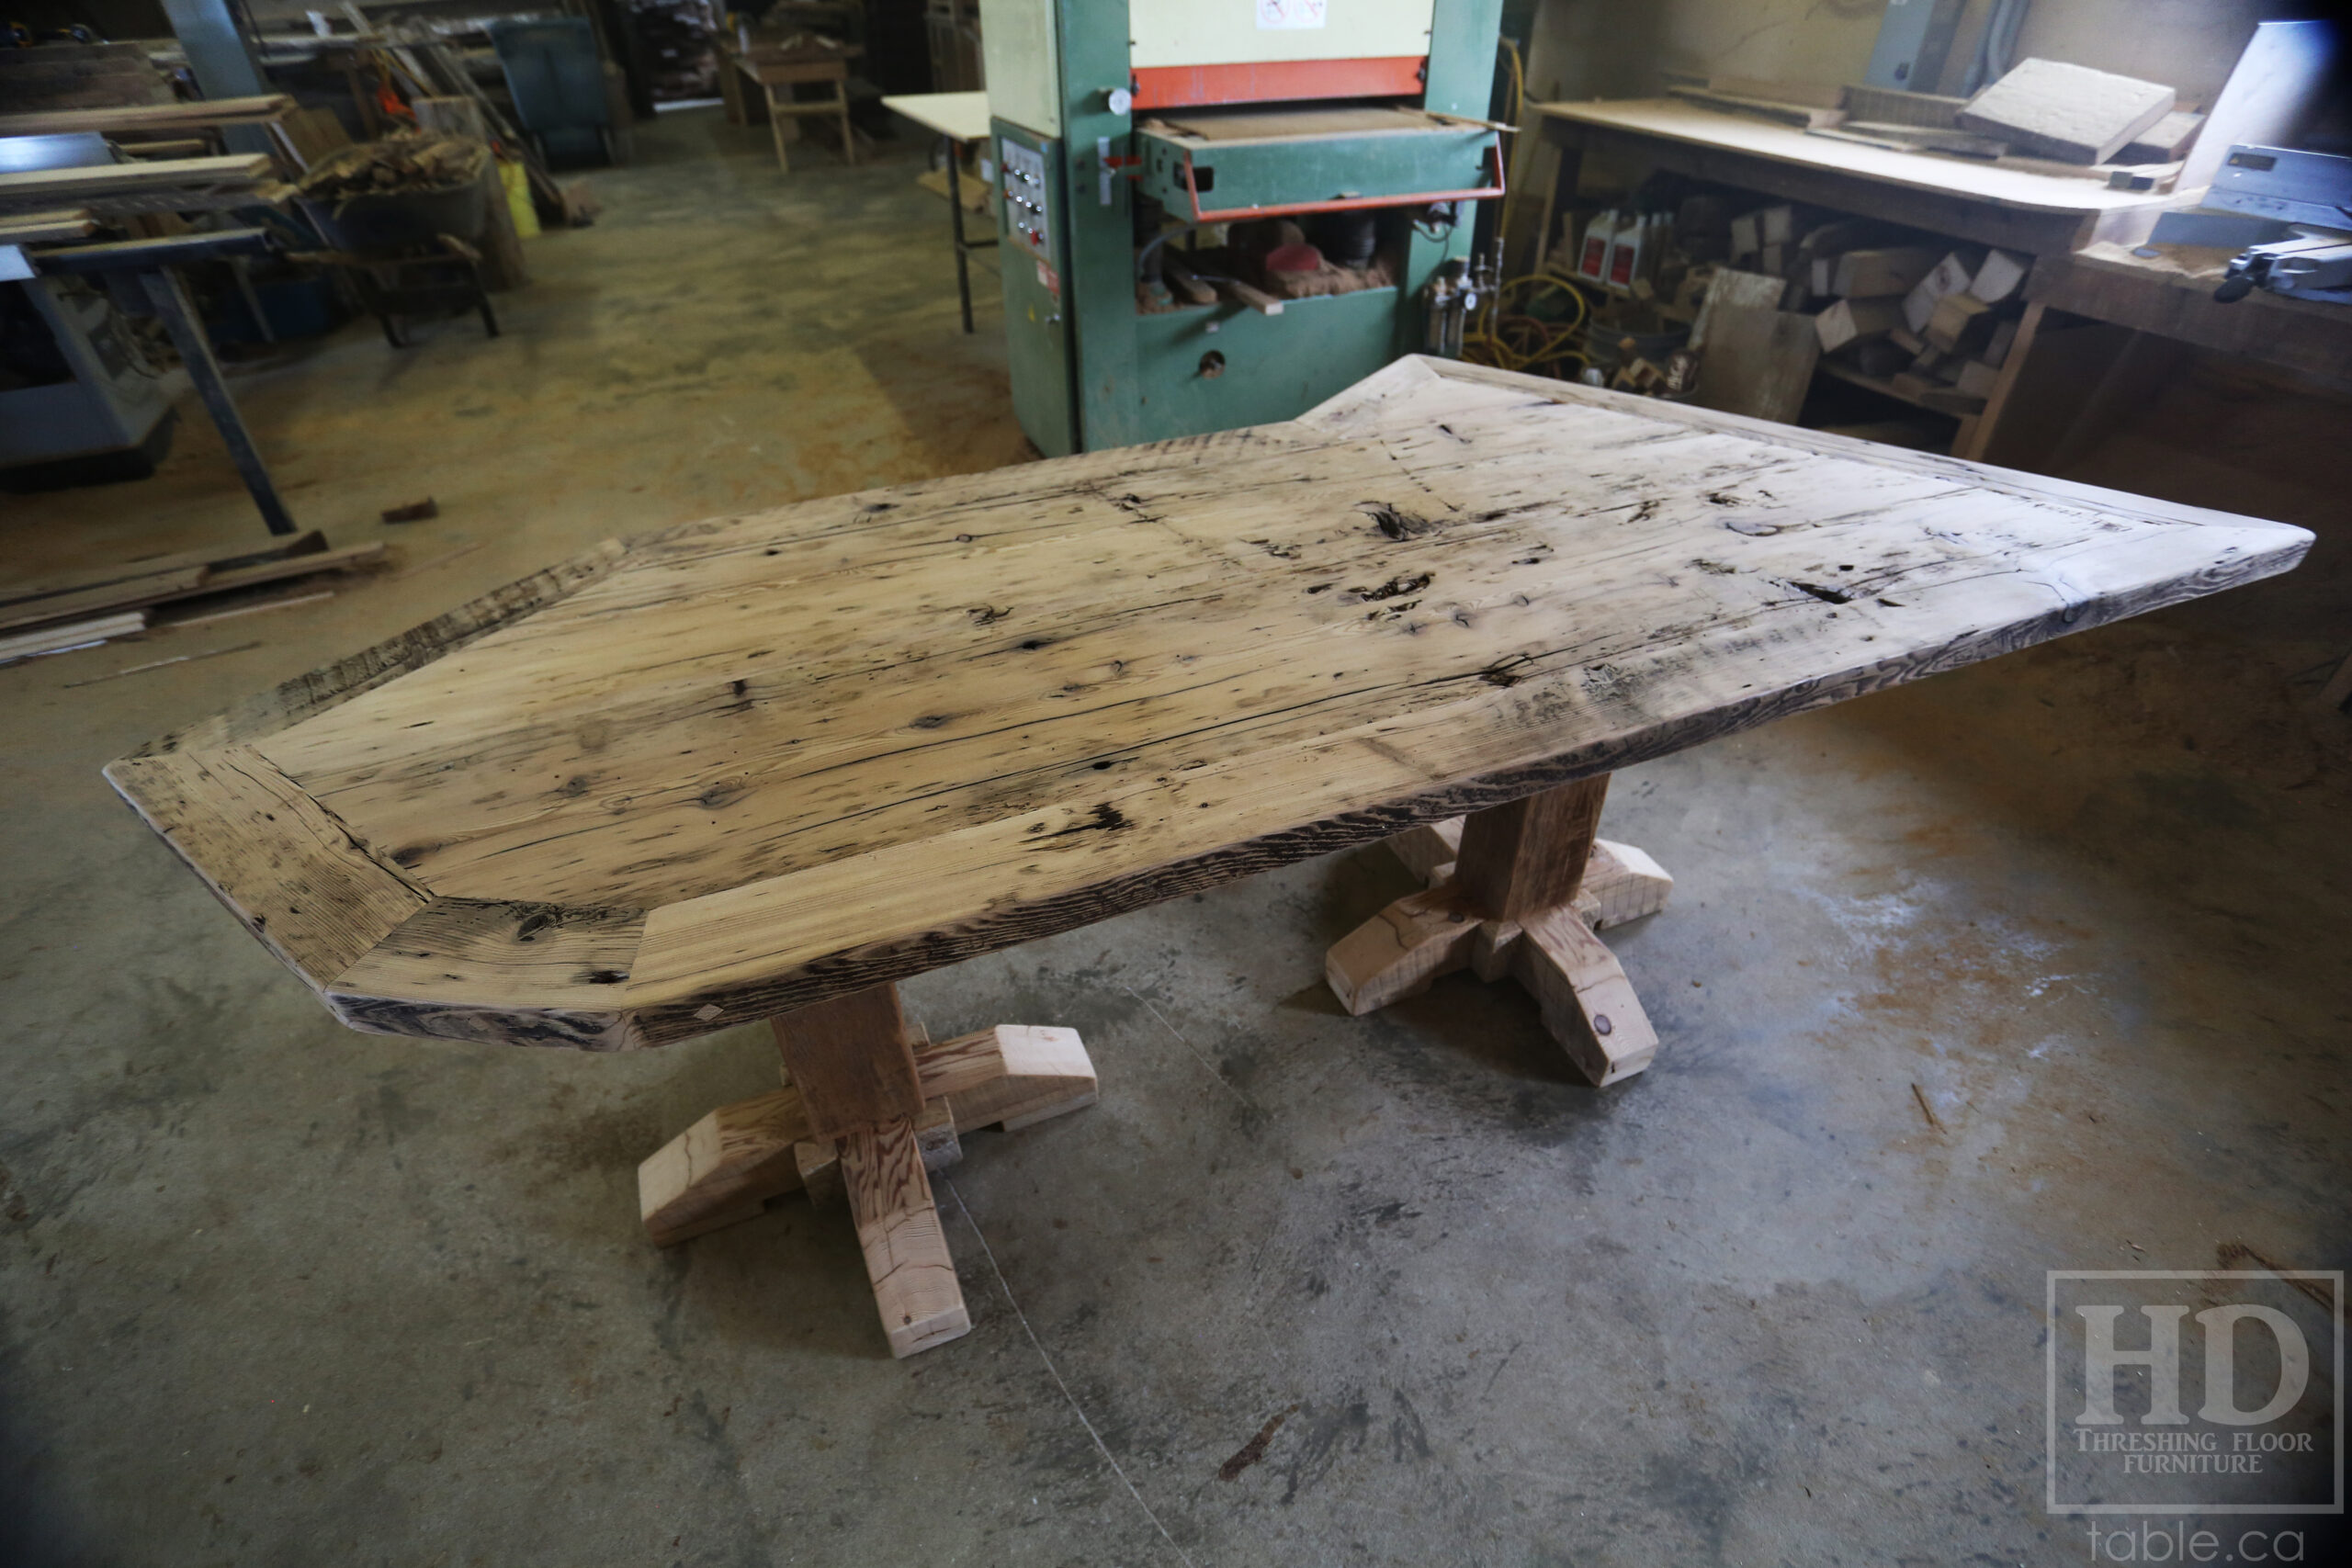 Custom Ontario Barnwood Desk – Barn Beam Posts – Modified Shape to Accommodate a Unique Space - Reclaimed Hemlock Threshing Floor 2” Top – Original edges & distressing maintained  – www.table.ca